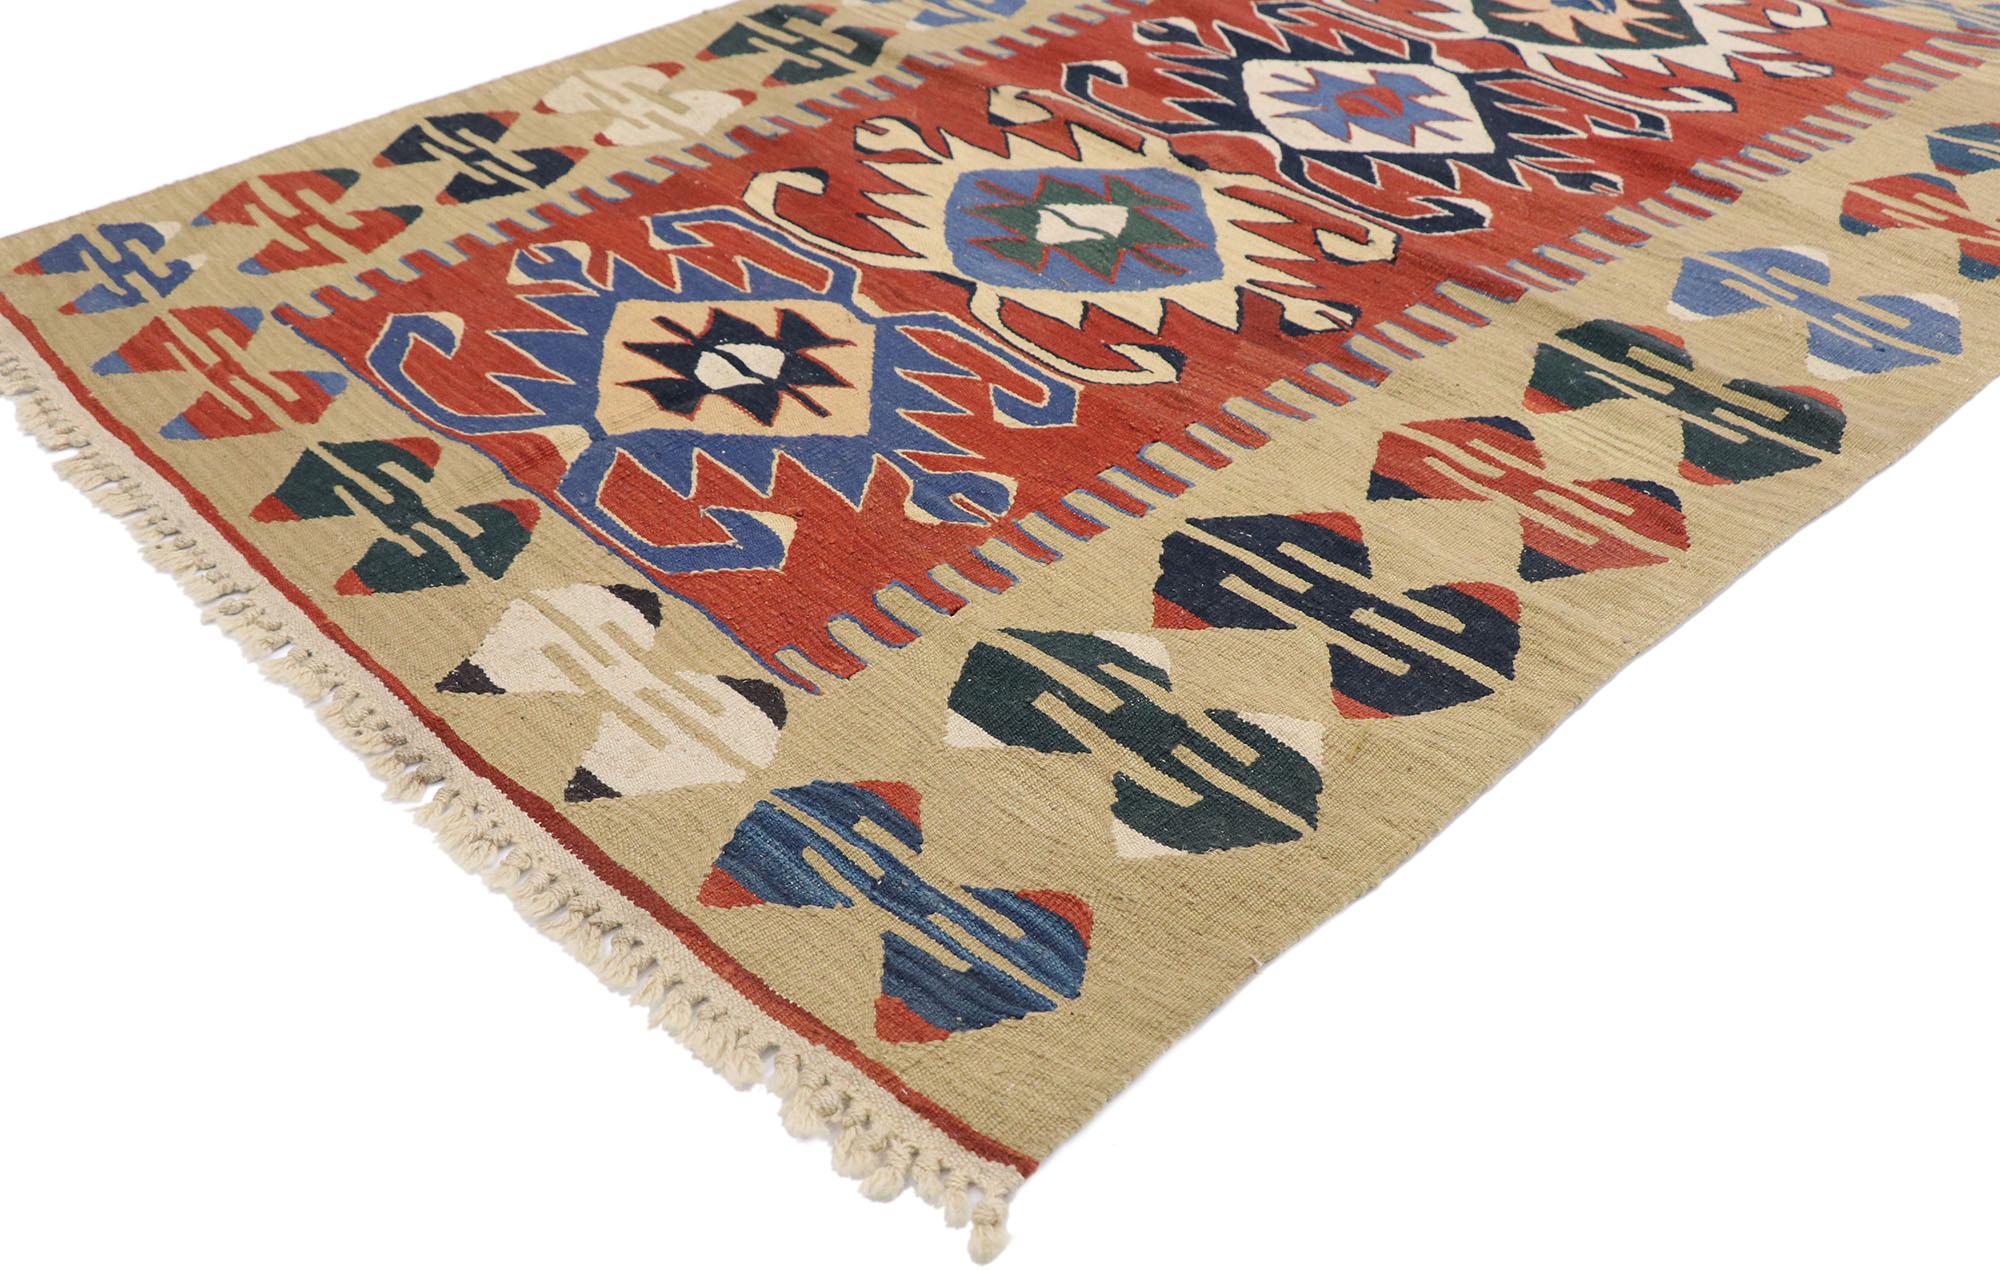 77824 vintage Persian Shiraz Kilim rug with Tribal style 03'10 x 05'04. Full of tiny details and a bold expressive design combined with vibrant colors and tribal style, this hand-woven wool vintage Persian Shiraz kilim rug is a captivating vision of